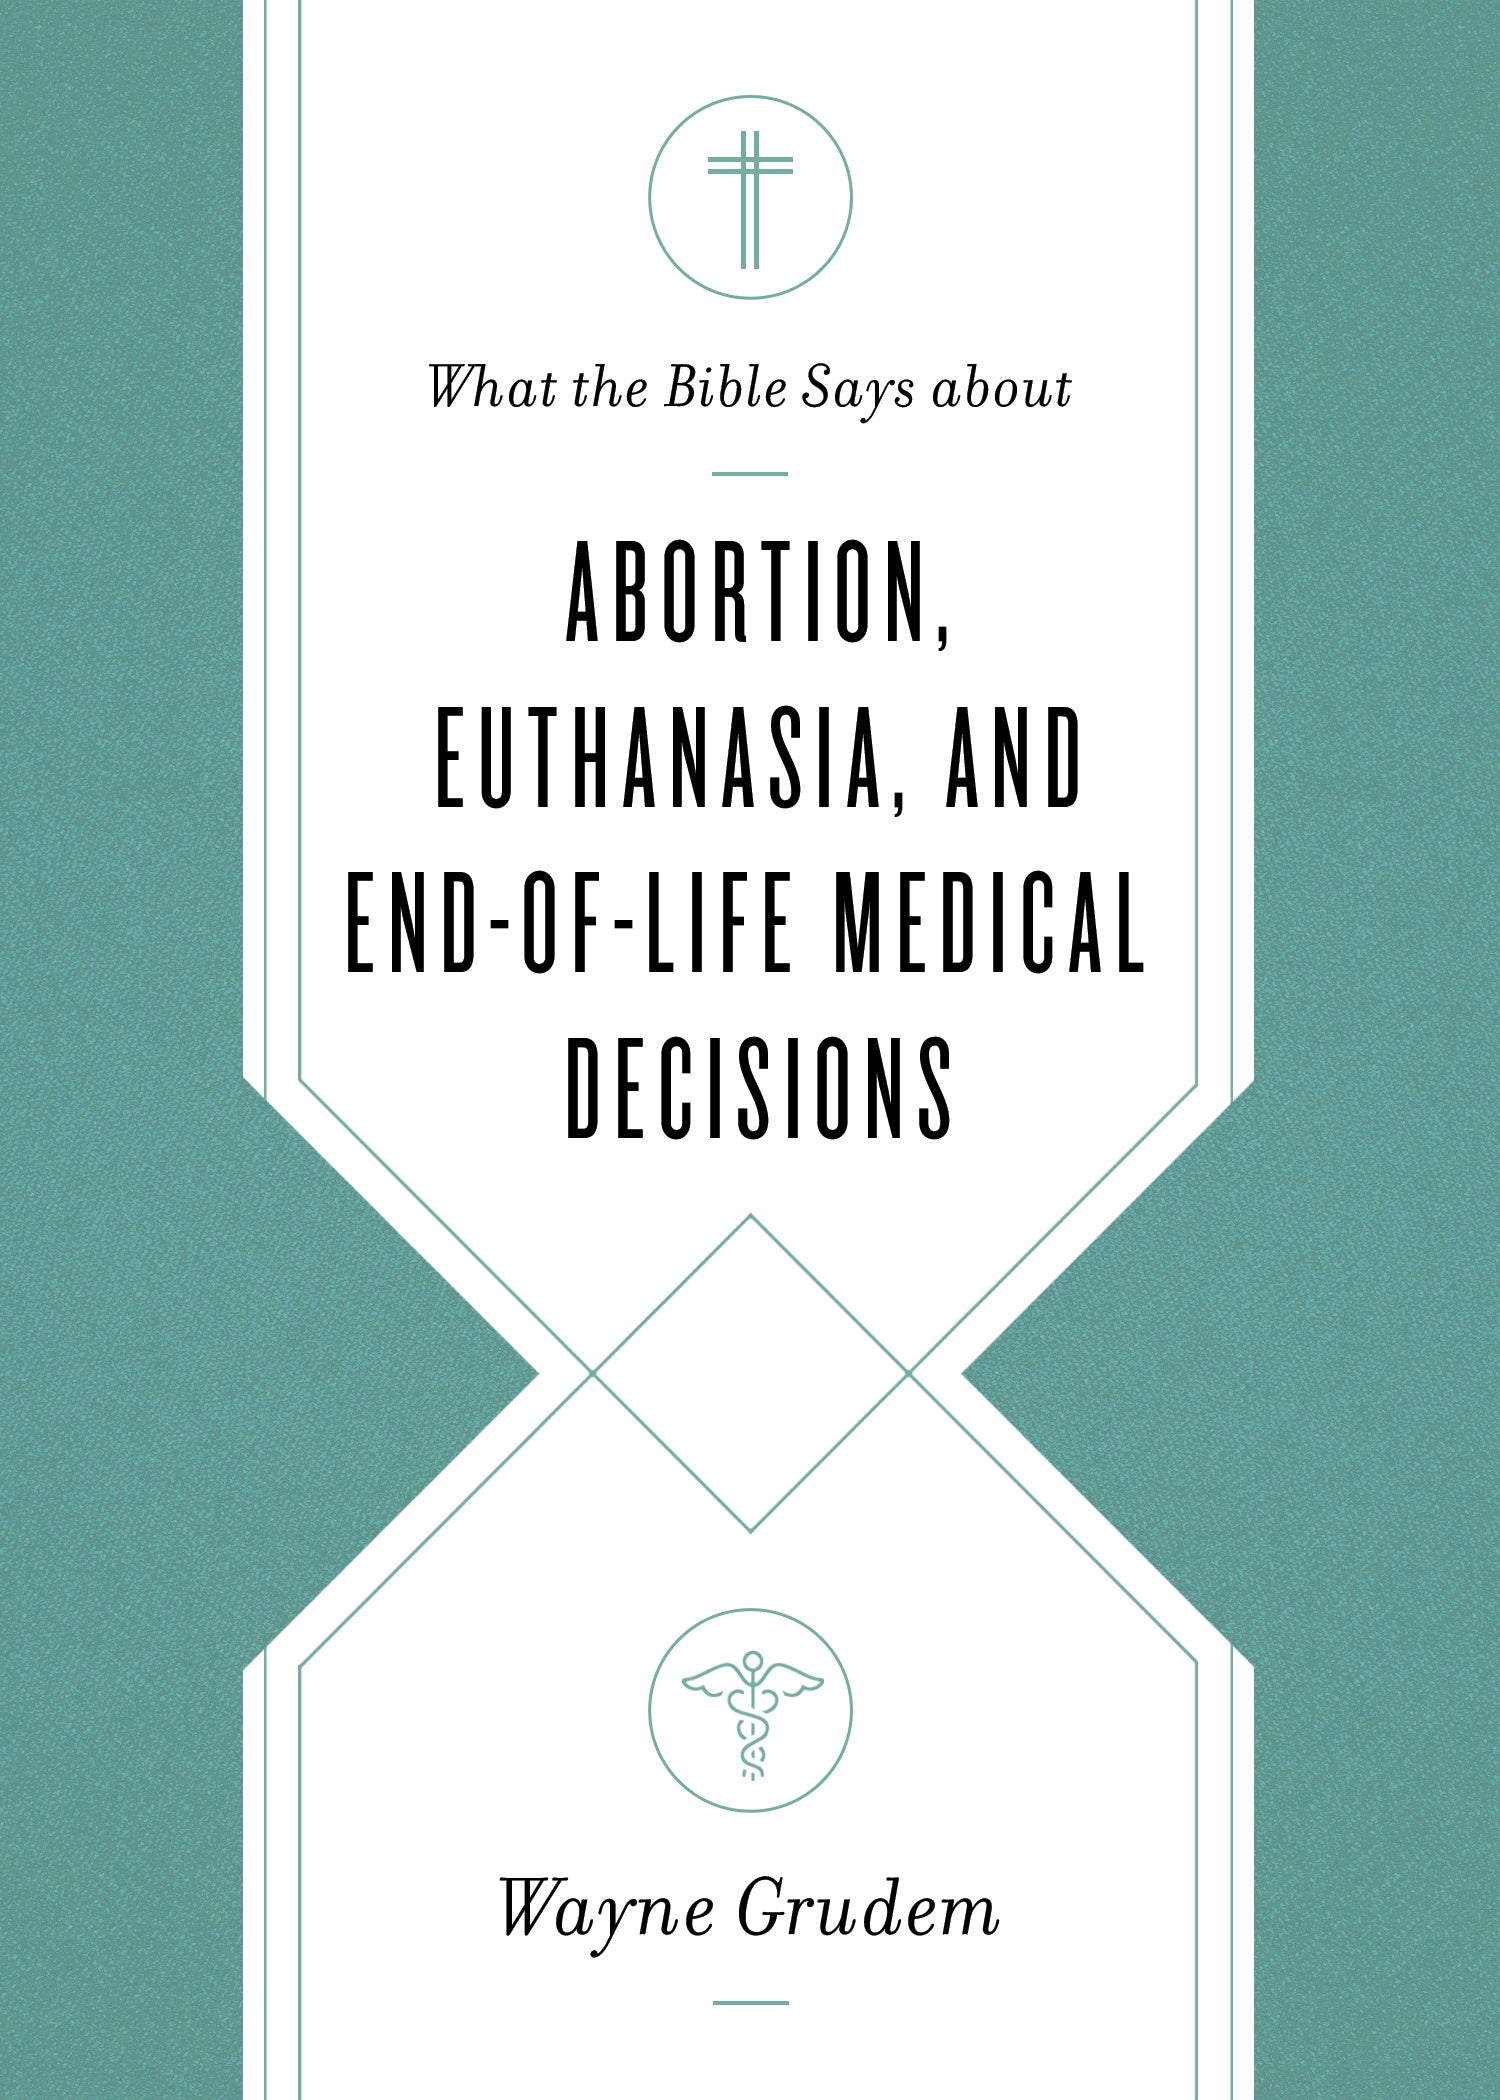 Image of What the Bible Says about Abortion, Euthanasia, and End-of-Life Medical Decisions other